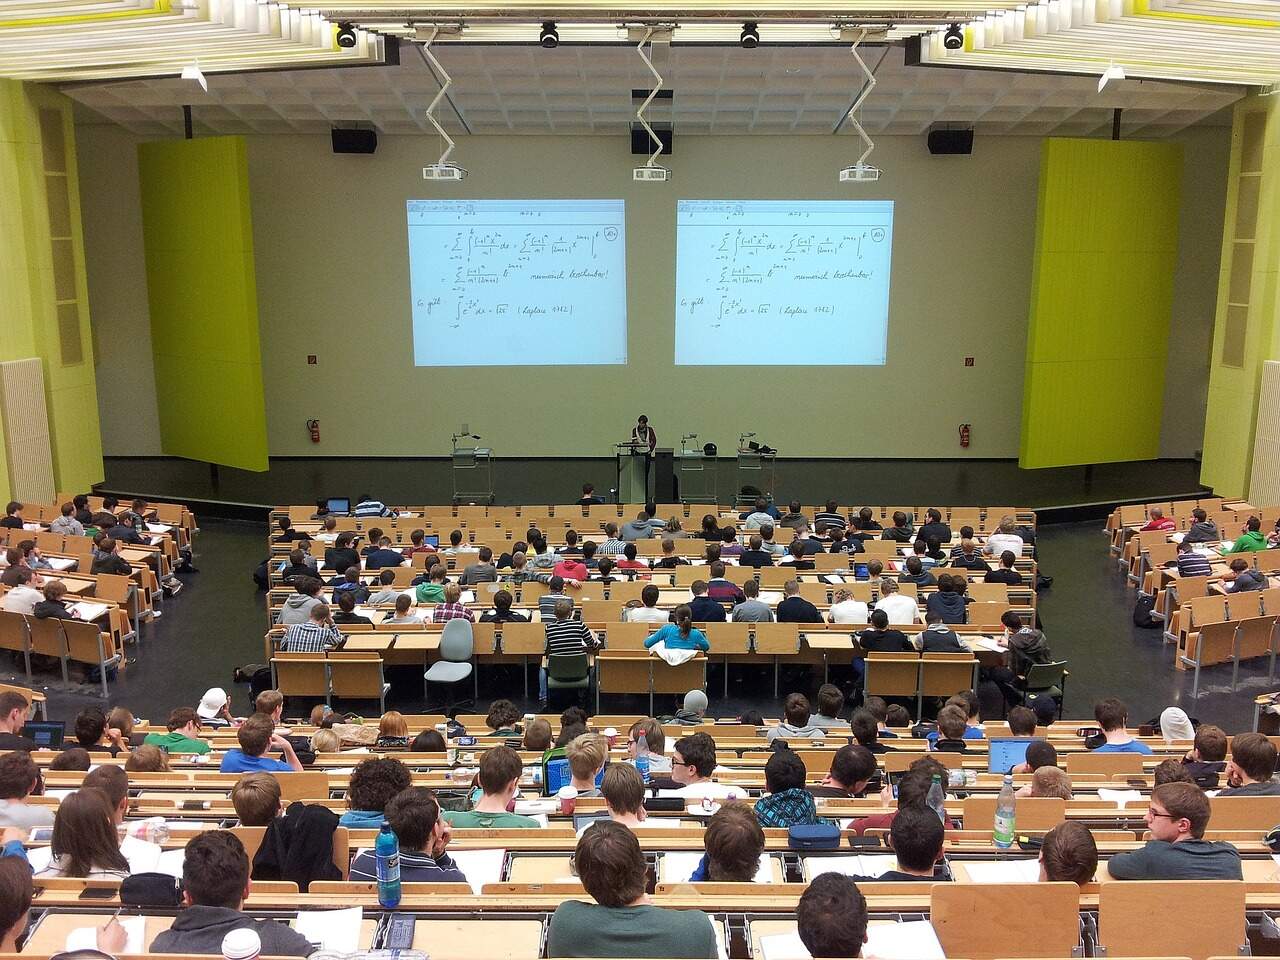 Students sitting in a lecture hall with a professor projecting lesson notes on the wall